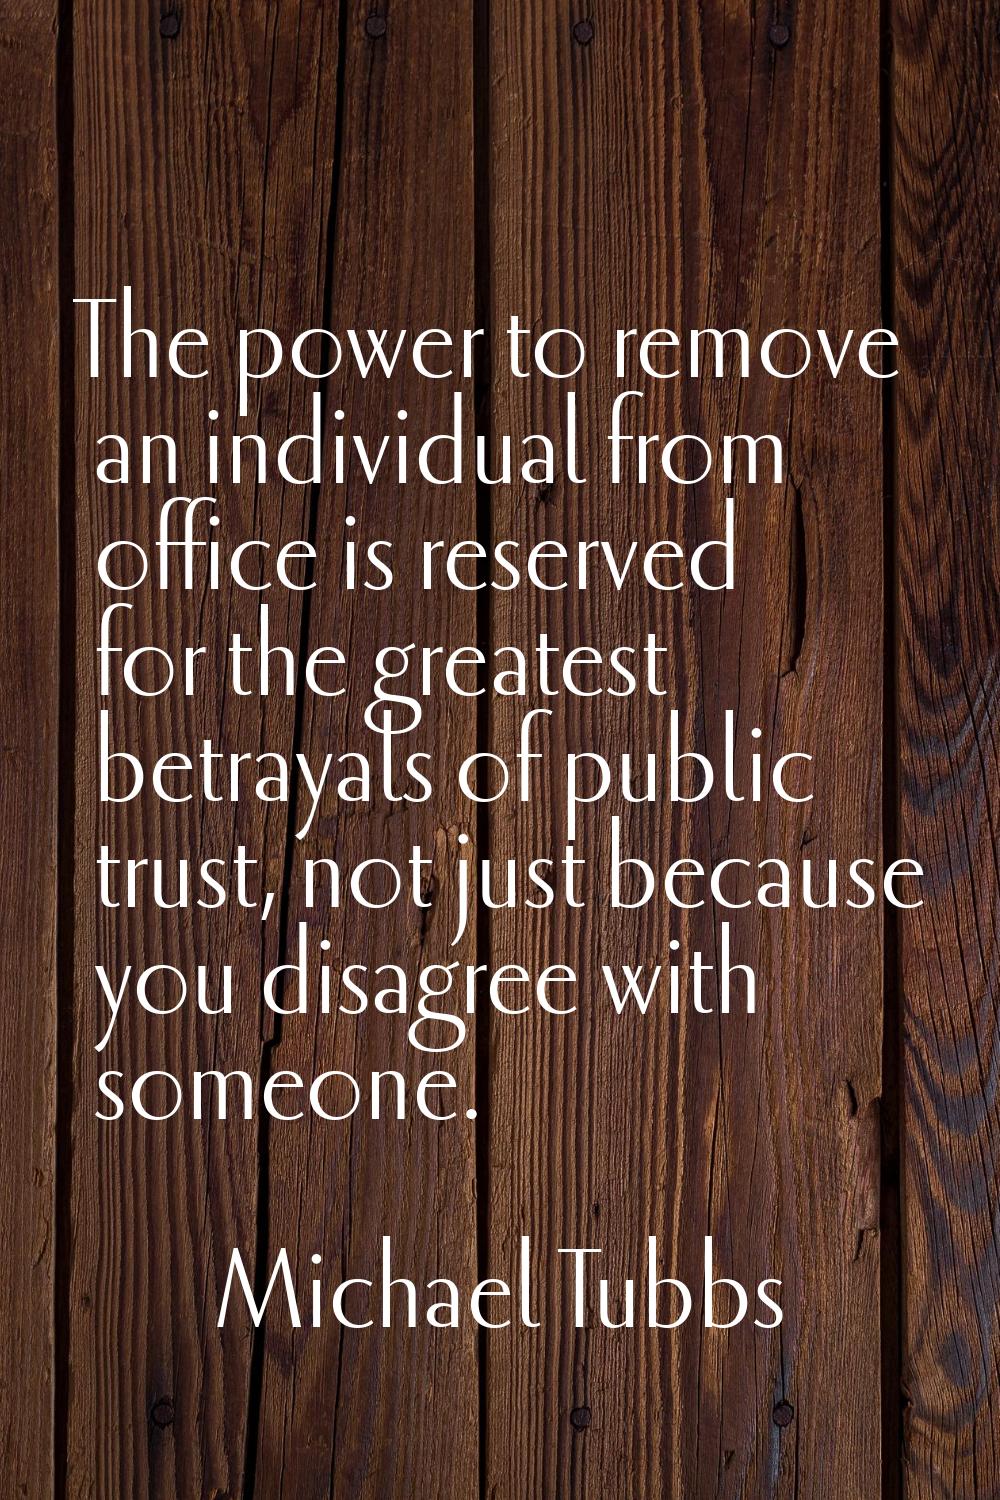 The power to remove an individual from office is reserved for the greatest betrayals of public trus